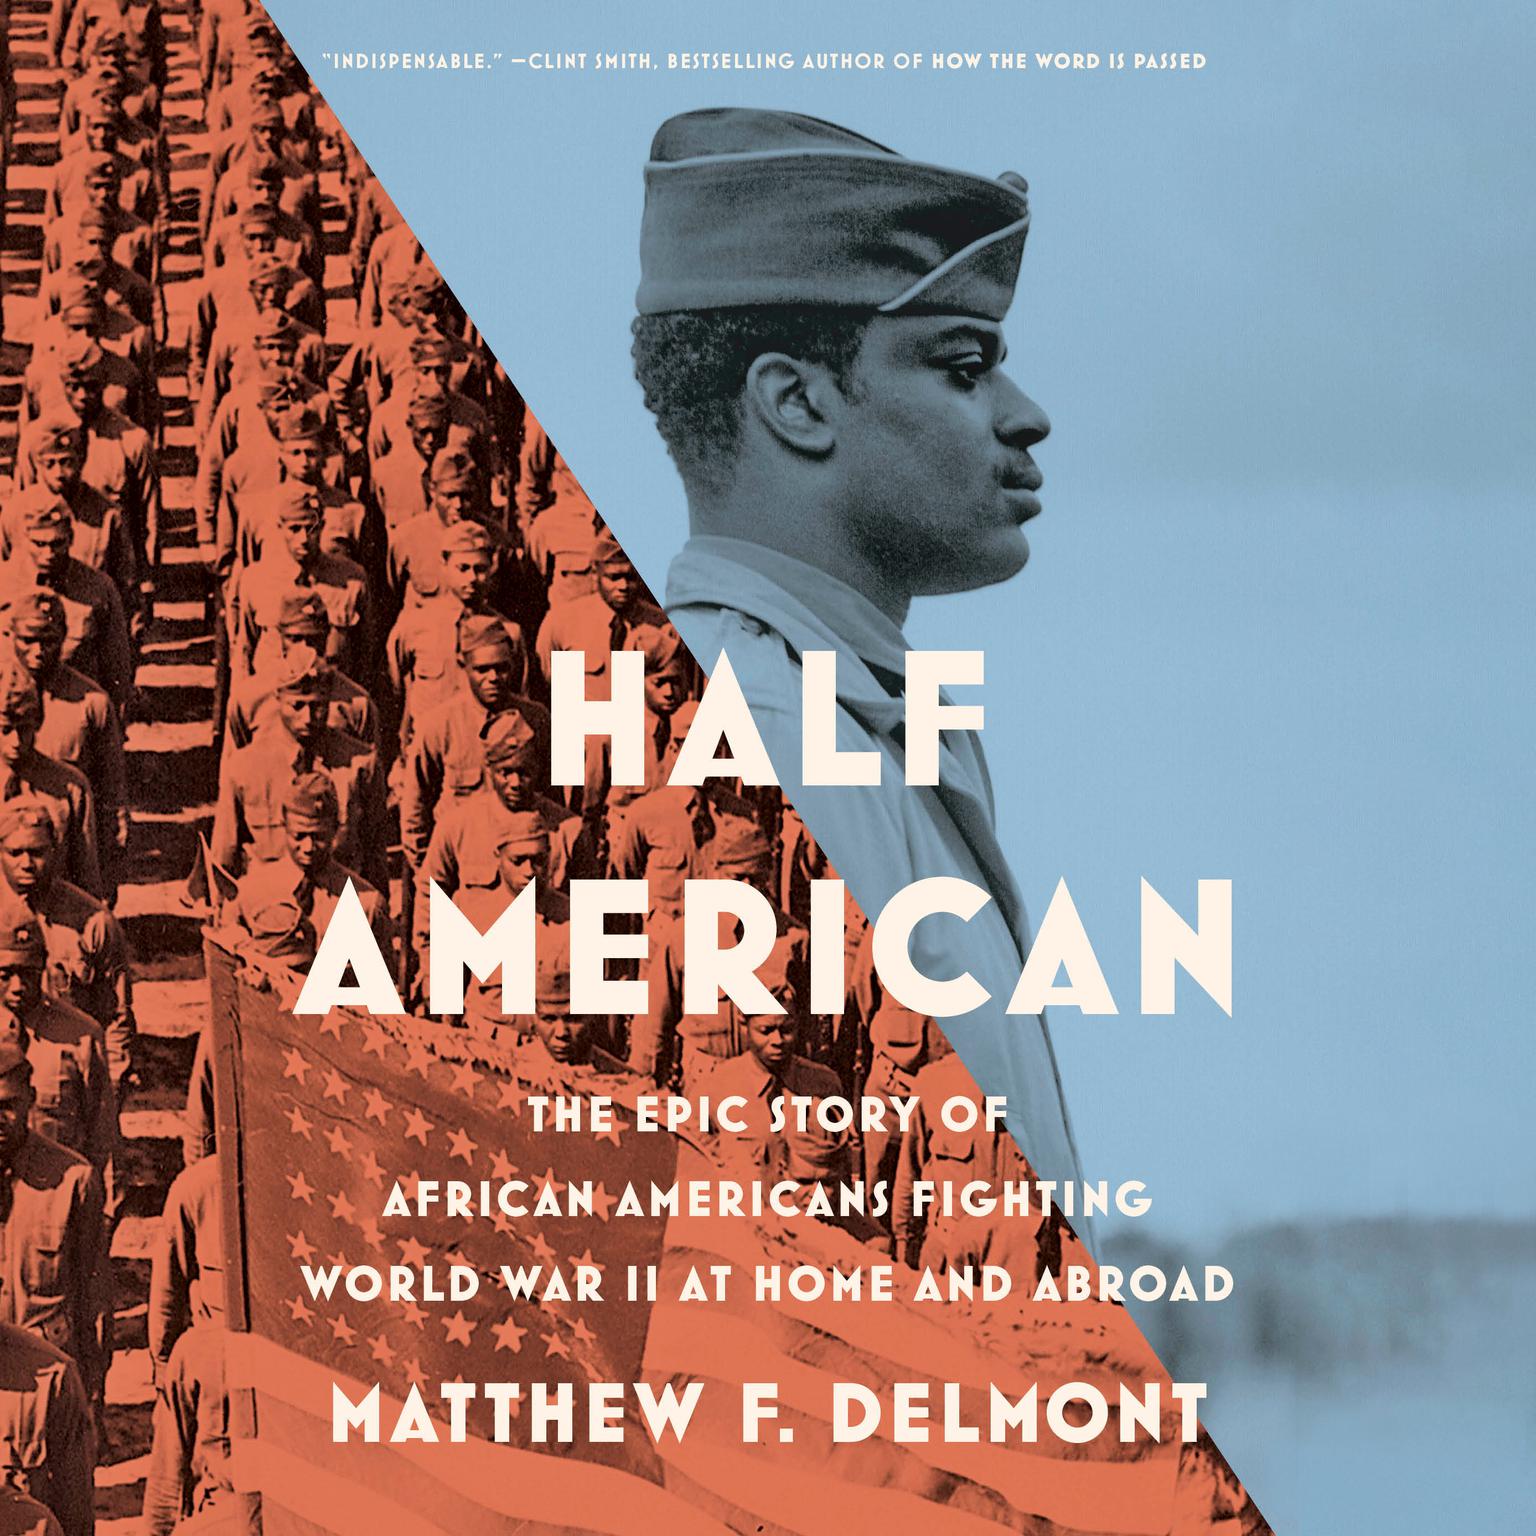 Half American: The Epic Story of African Americans Fighting World War II at Home and Abroad Audiobook, by Matthew F. Delmont